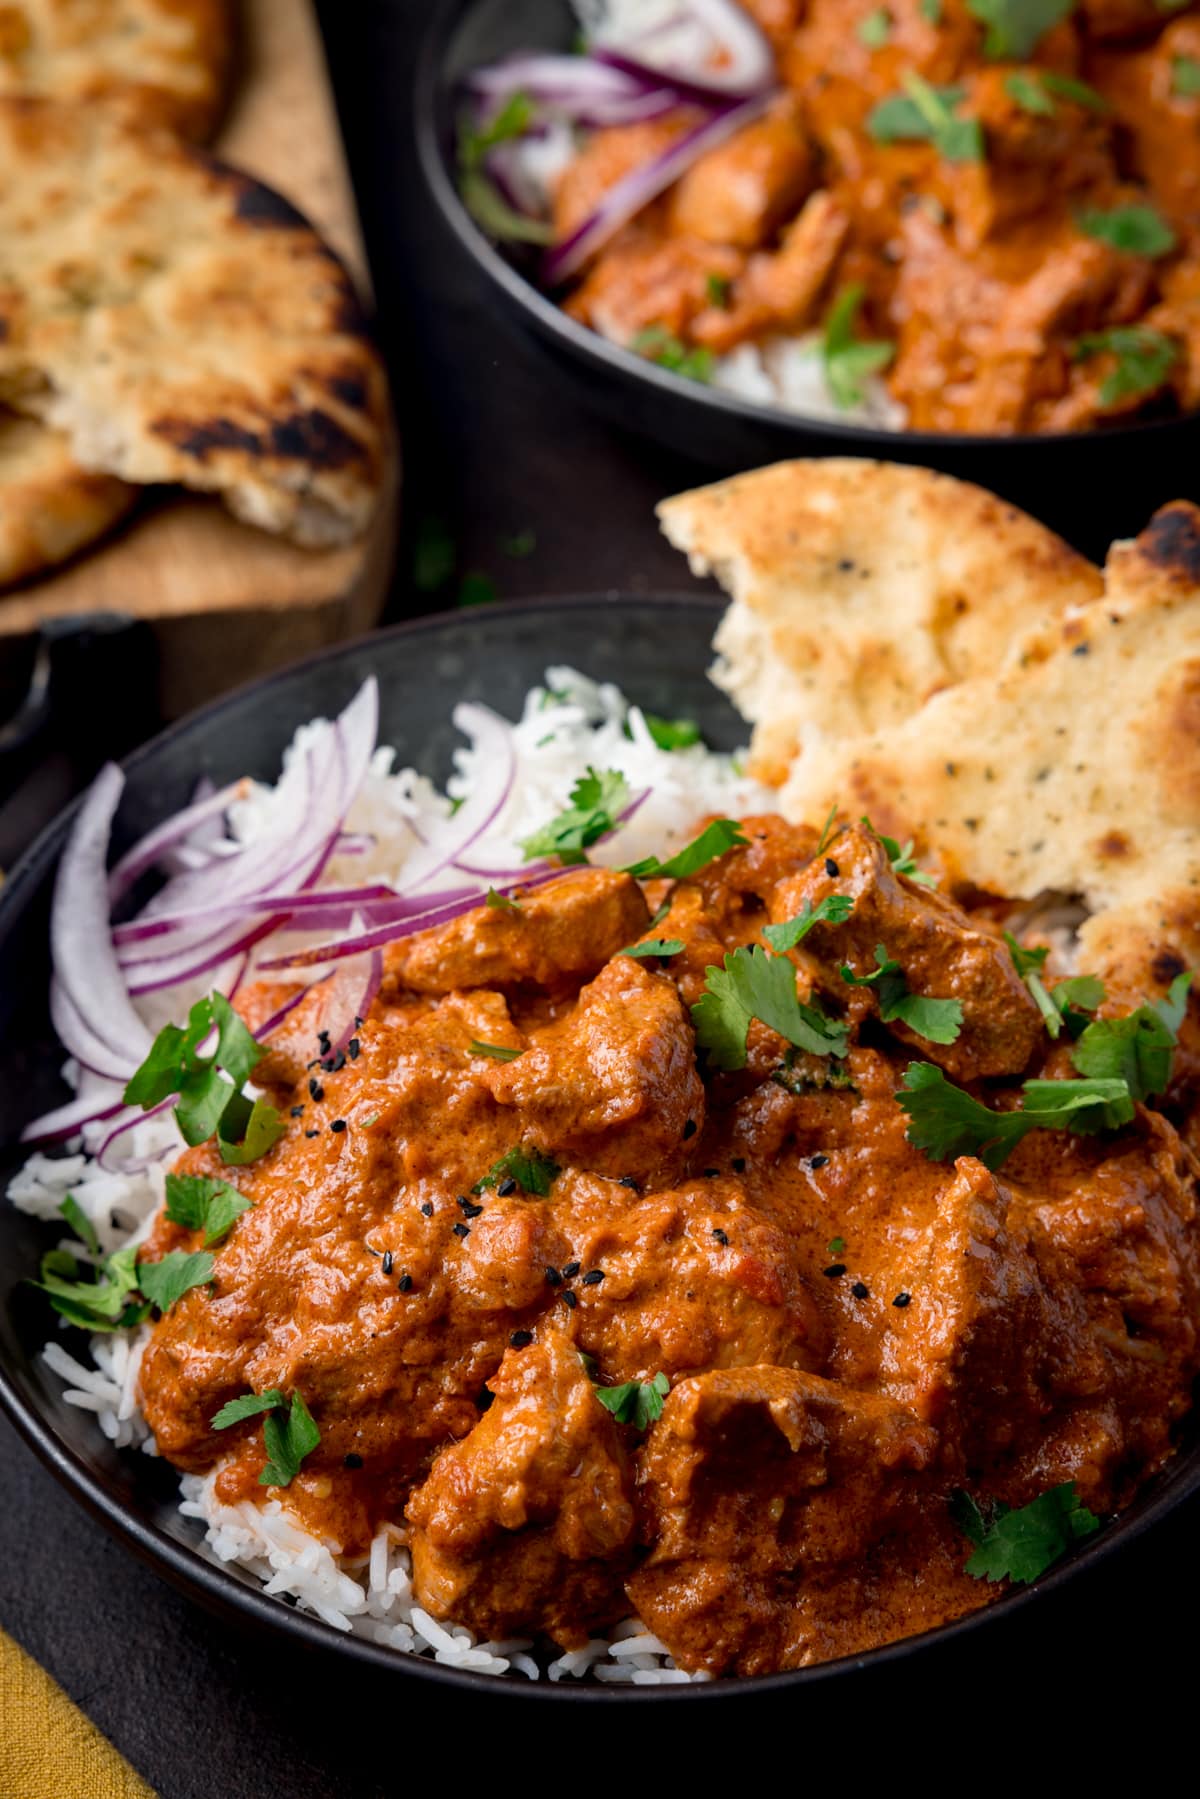 A bowl full of boiled rice and crock pot butter chicken with some sliced red onion and naan bread in the corner of the bowl.